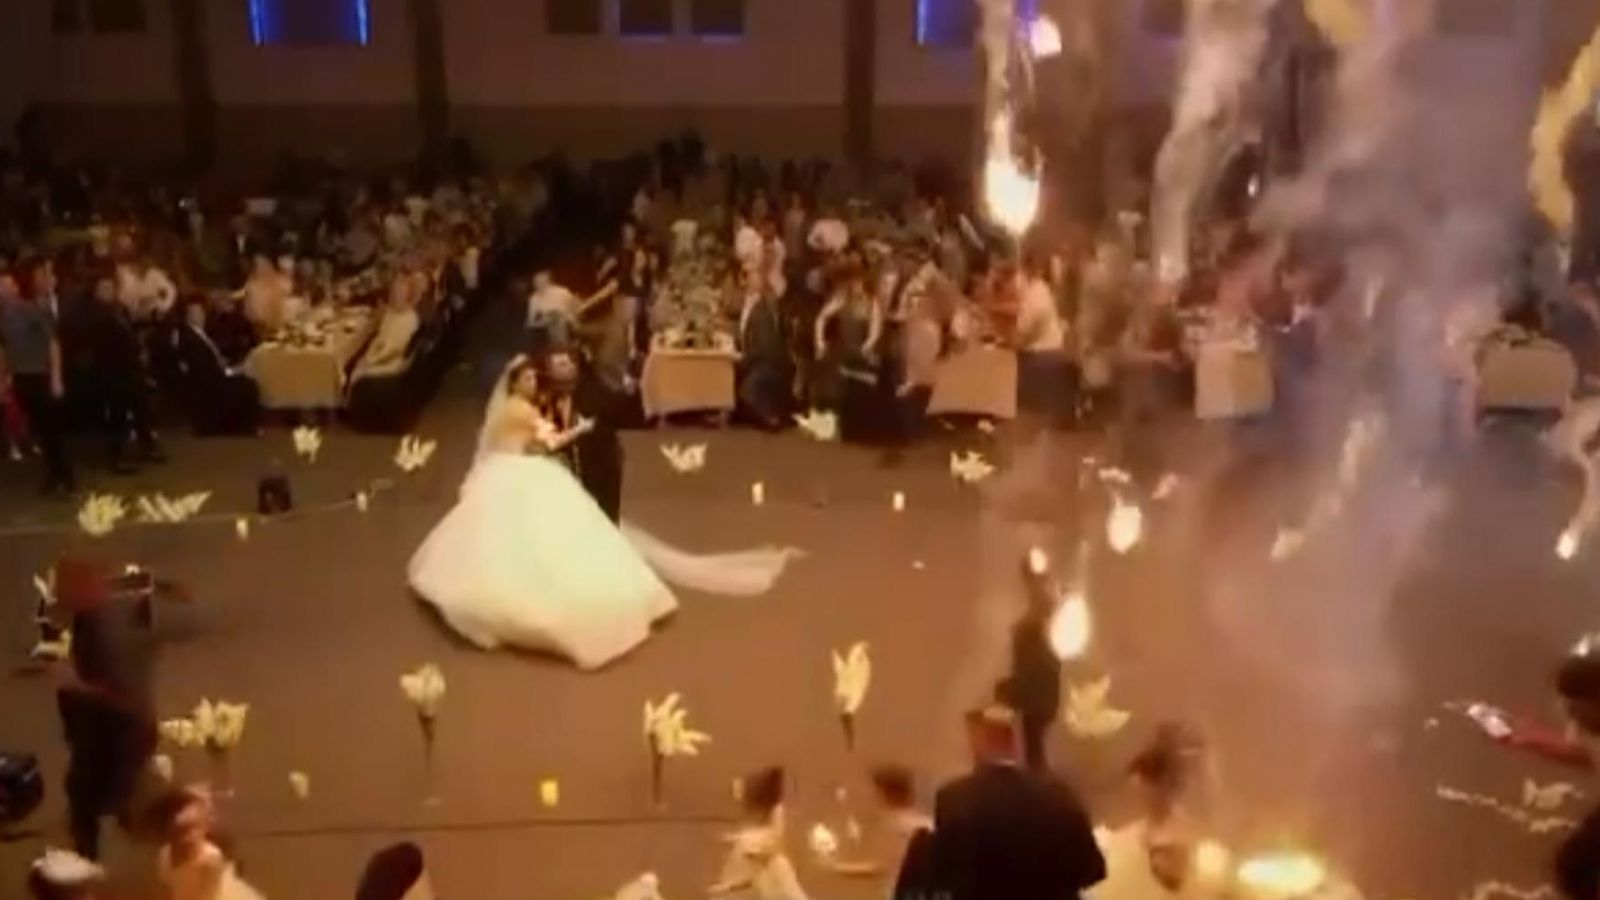 Iraq Moment deadly fire breaks out at wedding celebration News UK